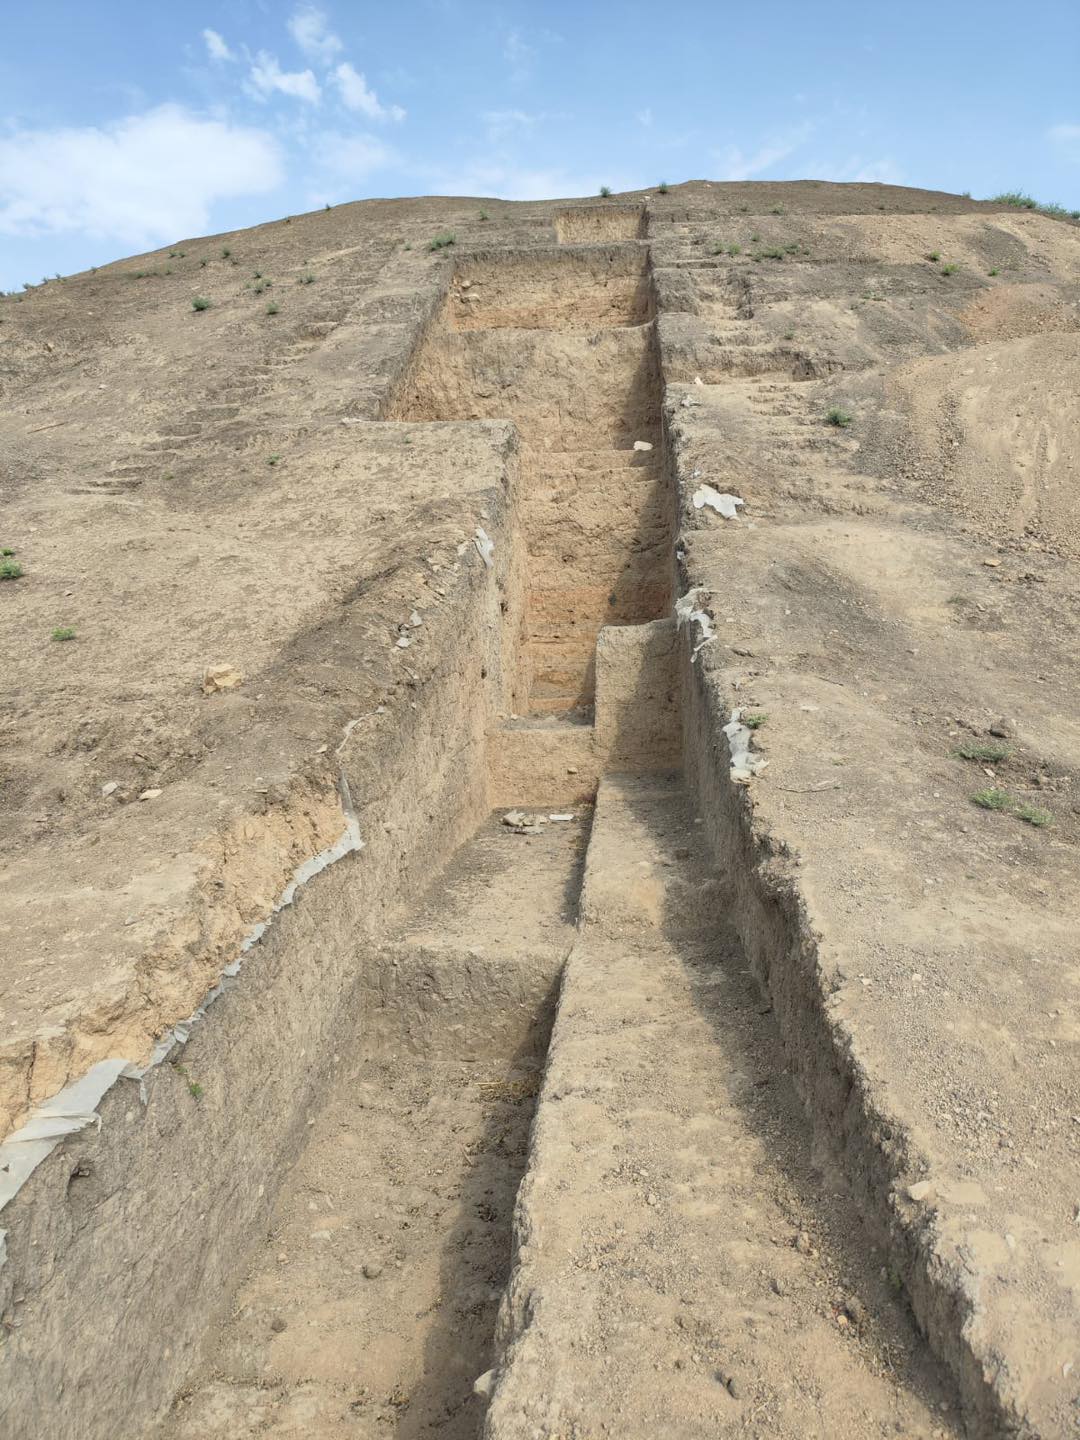 Archaeological site dating back over 2500 Years unearthed in al-Sulaymaniyah